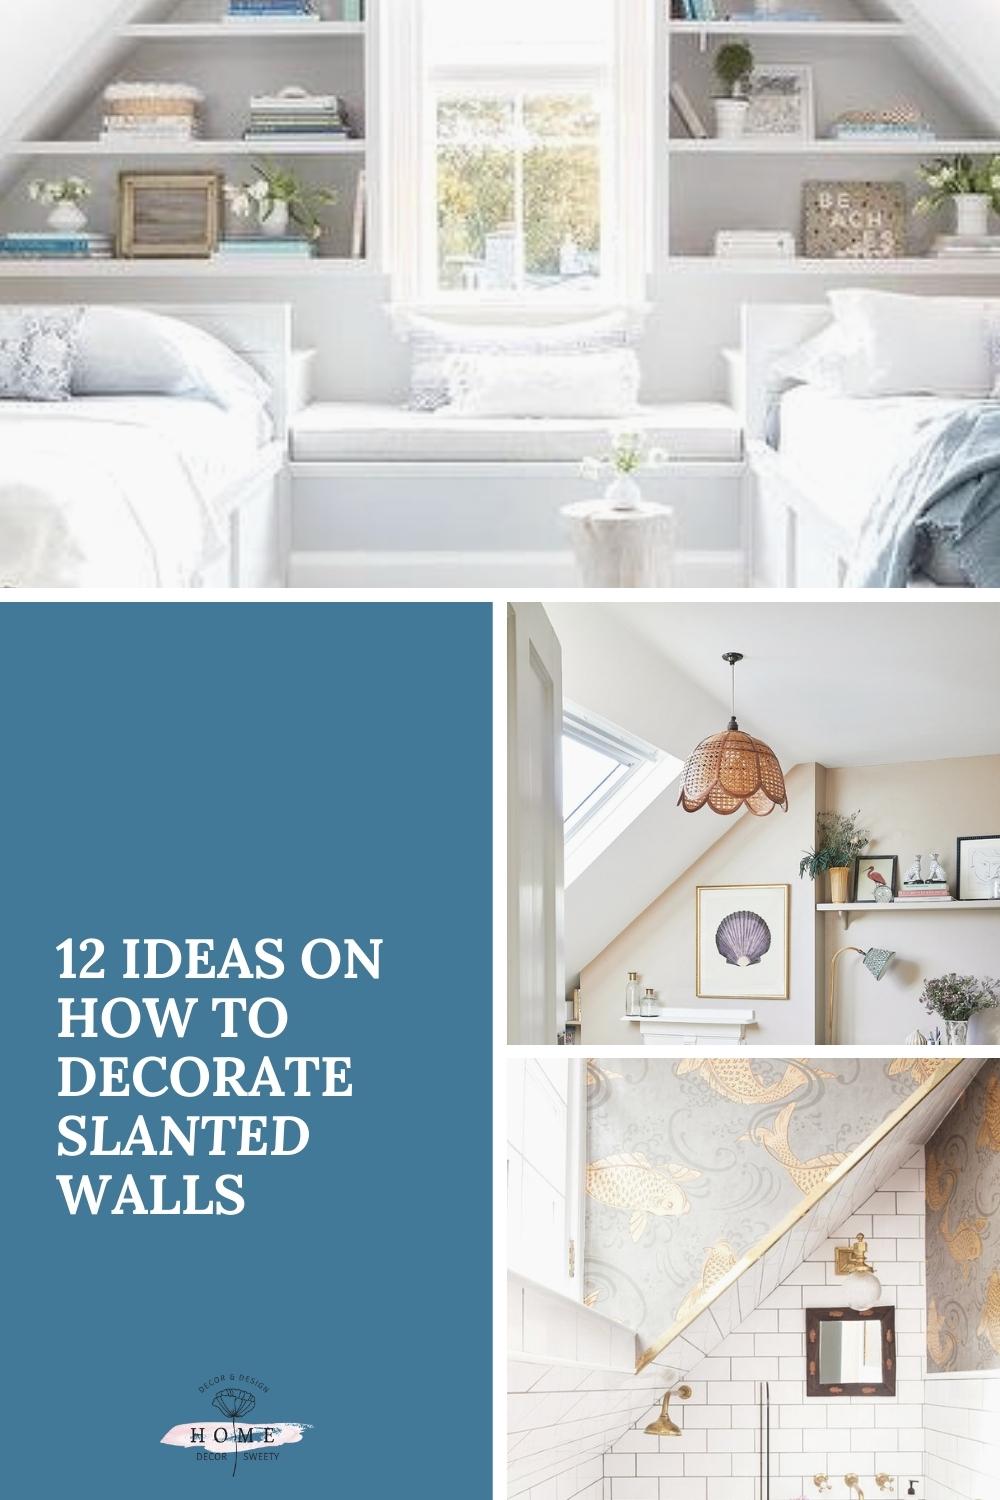 12 Ideas on How to Decorate Slanted Walls